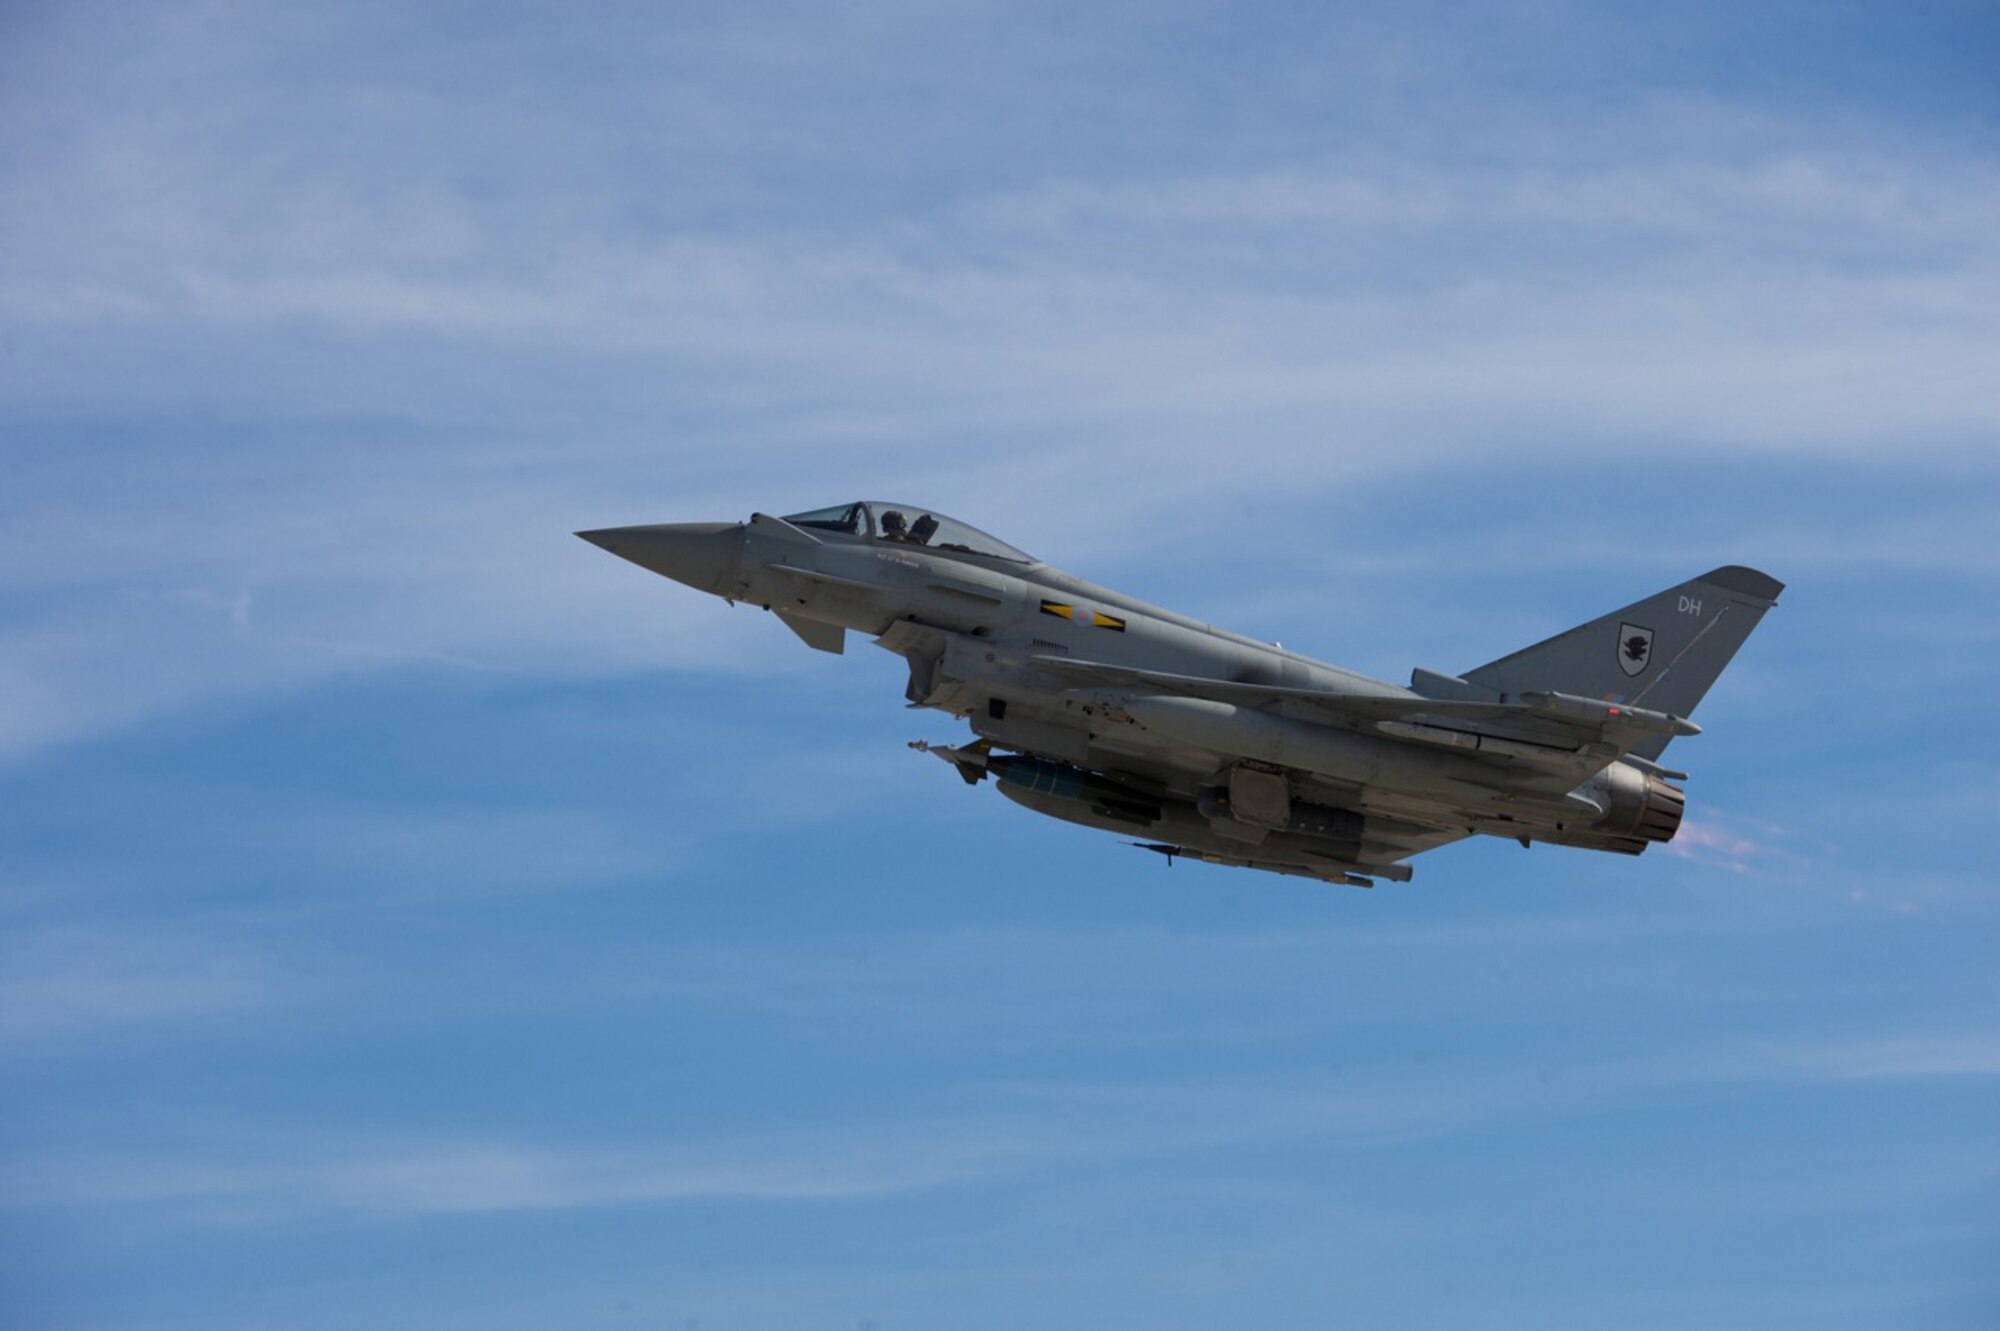 A Typhoon assigned to the 3 Fighter Squadron, Royal Air Force Coningsby U.K., launches from the flightline for a training sortie during Red Flag 16-1 at Nellis Air Force Base, Nev., Jan. 27, 2015. The 3 FS was one of three founding squadrons of the Royal Flying Corps Squadrons formed on May 13, 1912. (U.S. Air Force photo by Senior Airman Mikaley Kline)